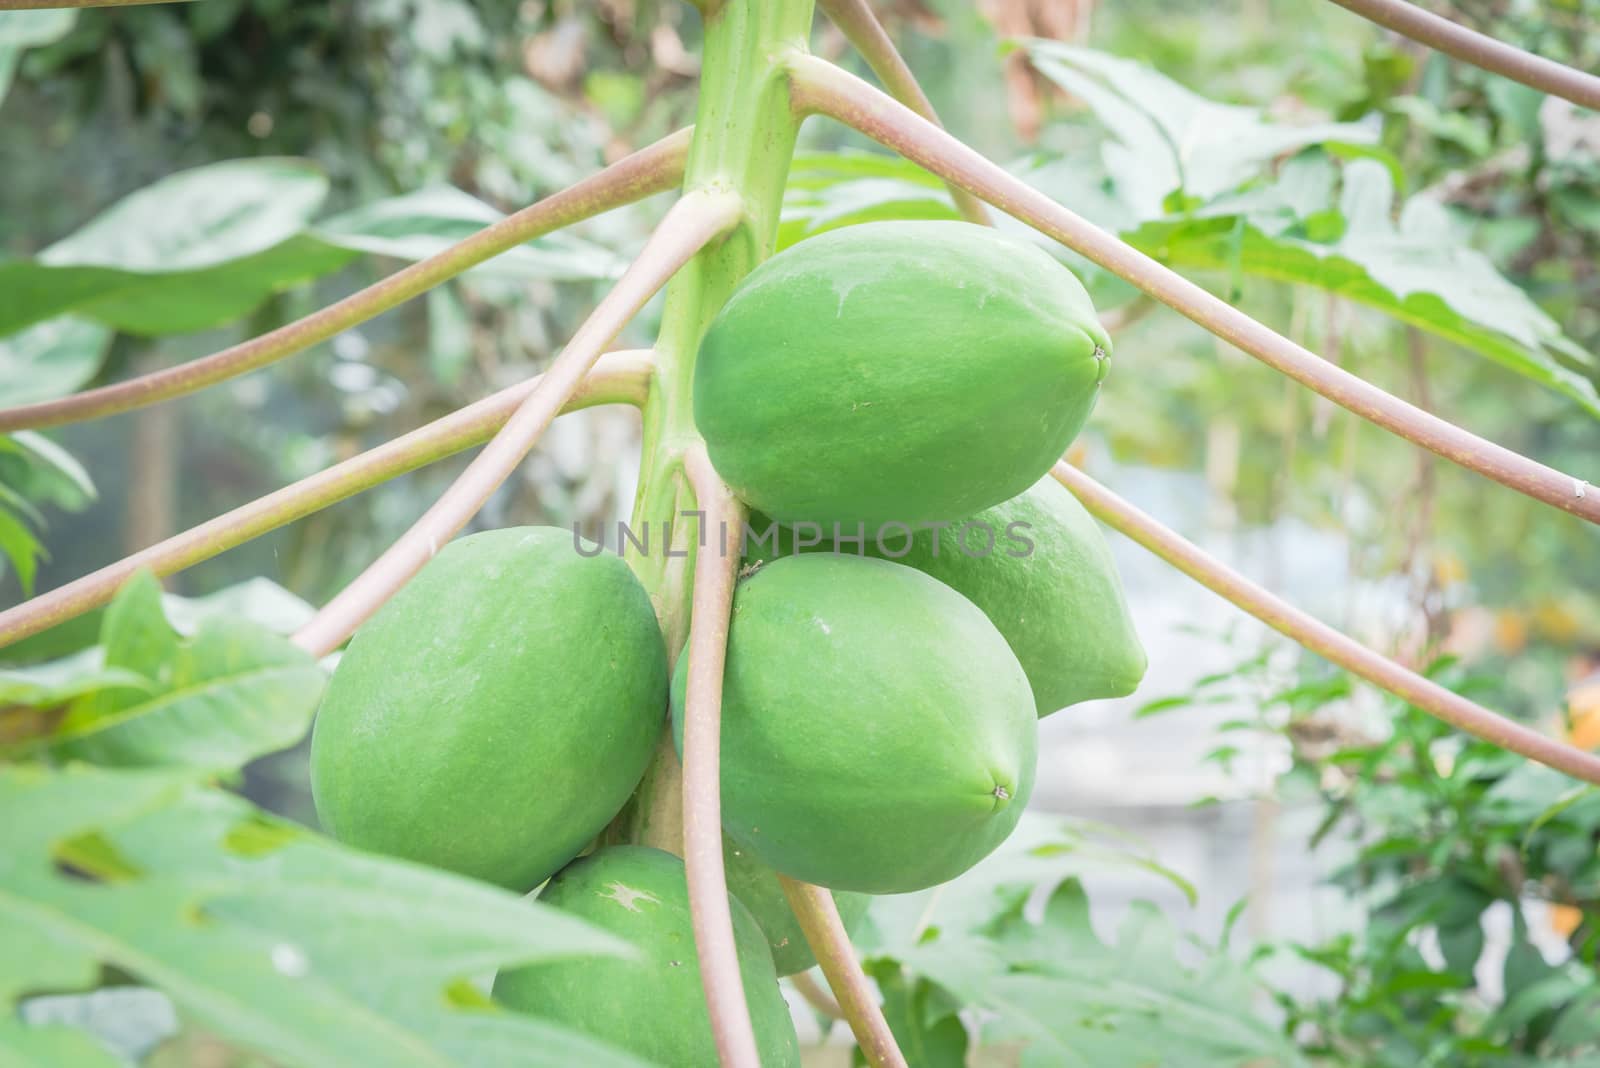 Bunch of green papaya on tree branch at garden in North Vietnam. Organic papaw or pawpaw tropical fruit growing with long leaves stem